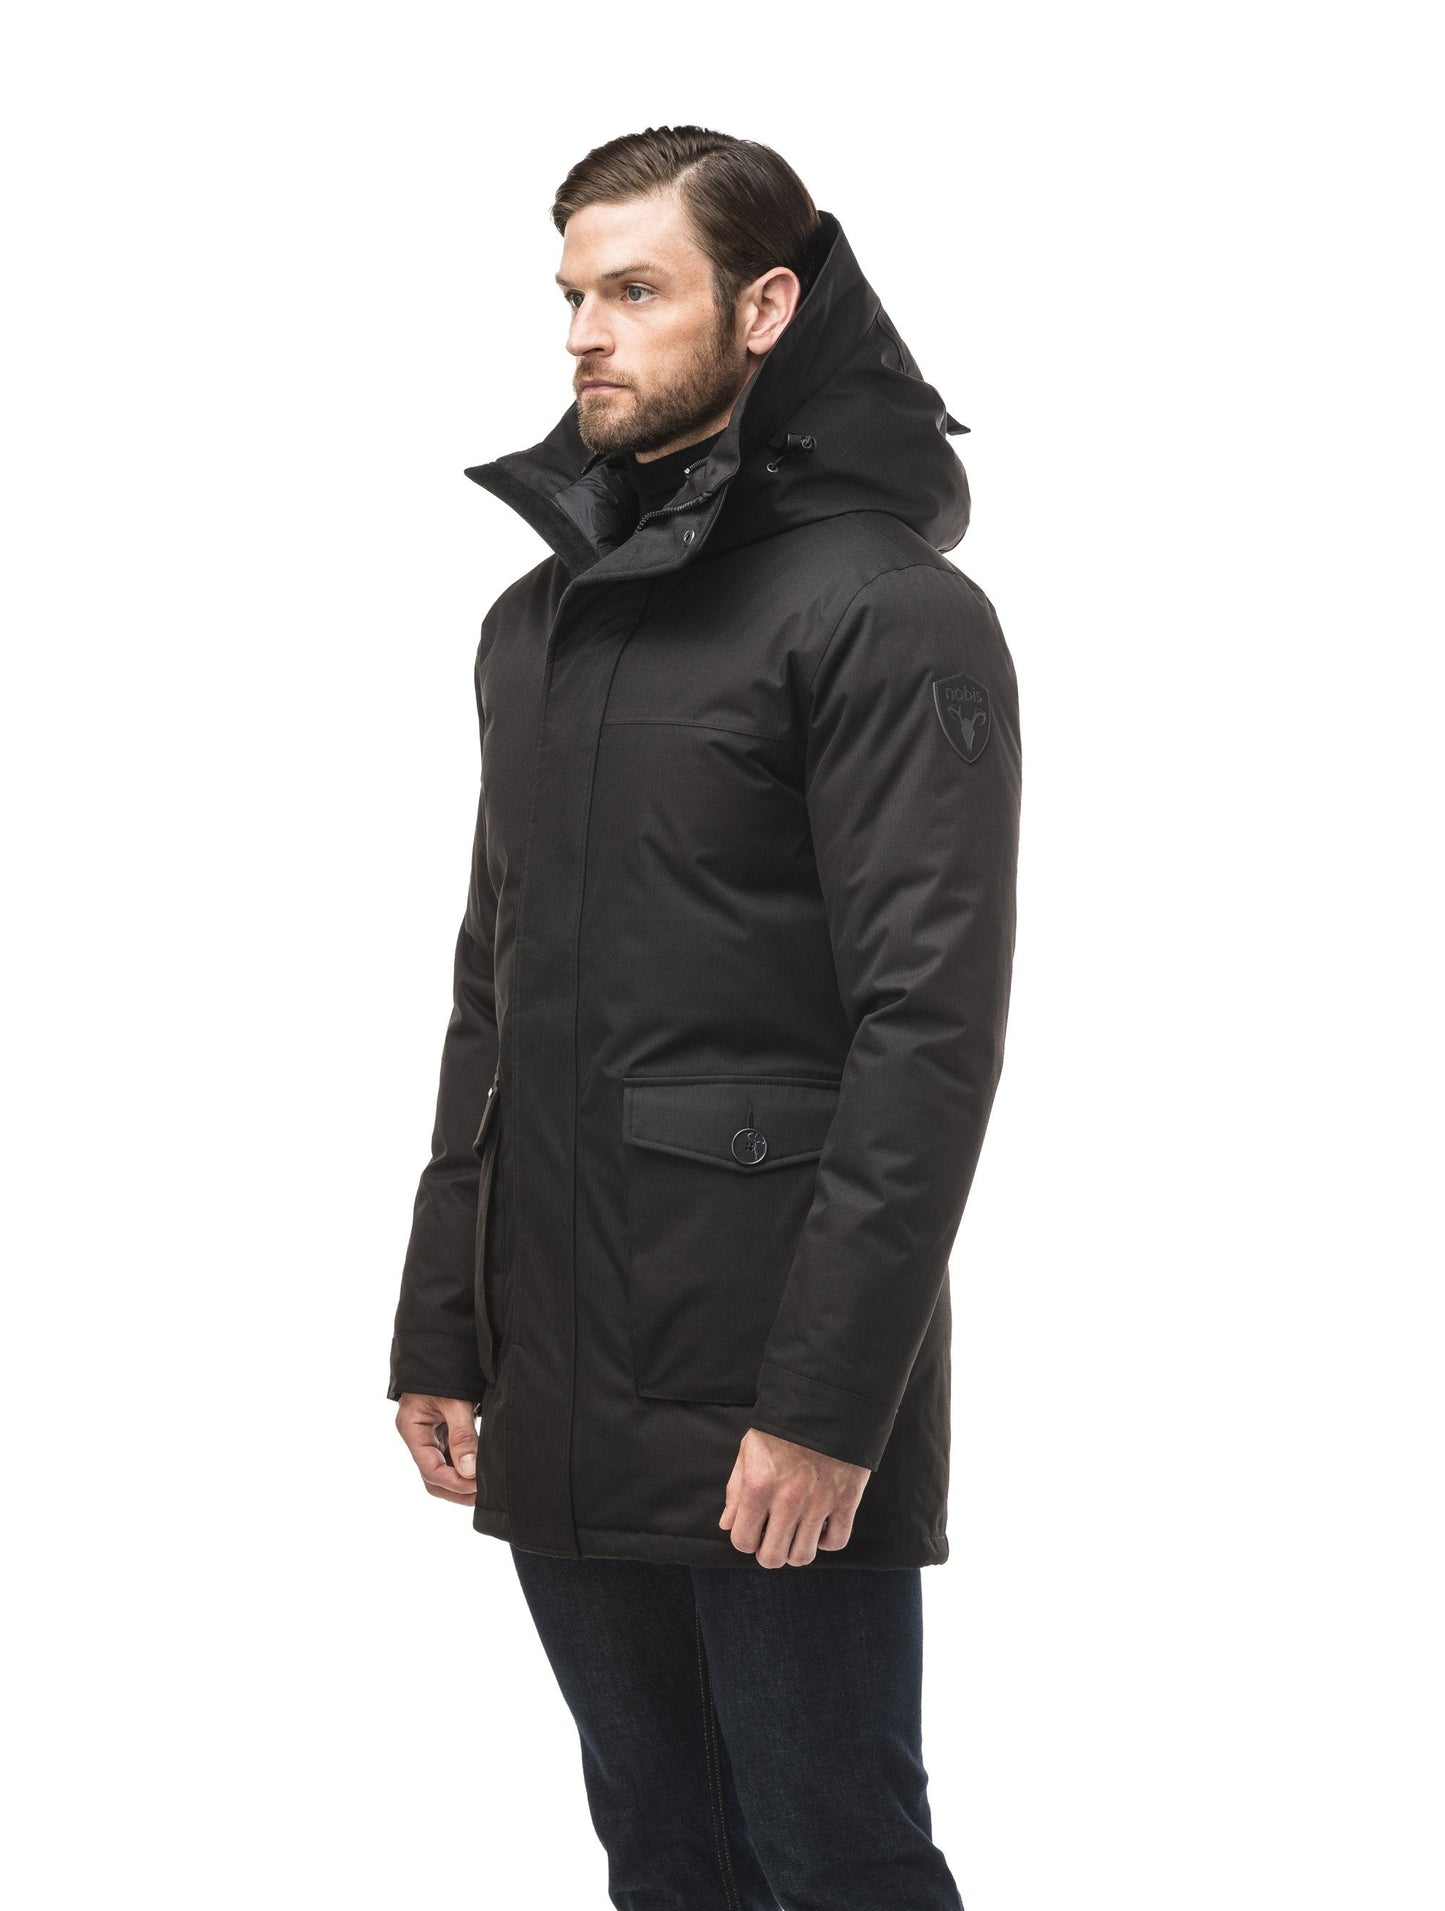 Yves Furless Men's Parka in thigh length, Canadian white duck down insulation, non-removable down-filled hood, flap pockets at waist, centre-front two-way zipper with magnetic wind flap, and elastic ribbed cuffs, in CH Black